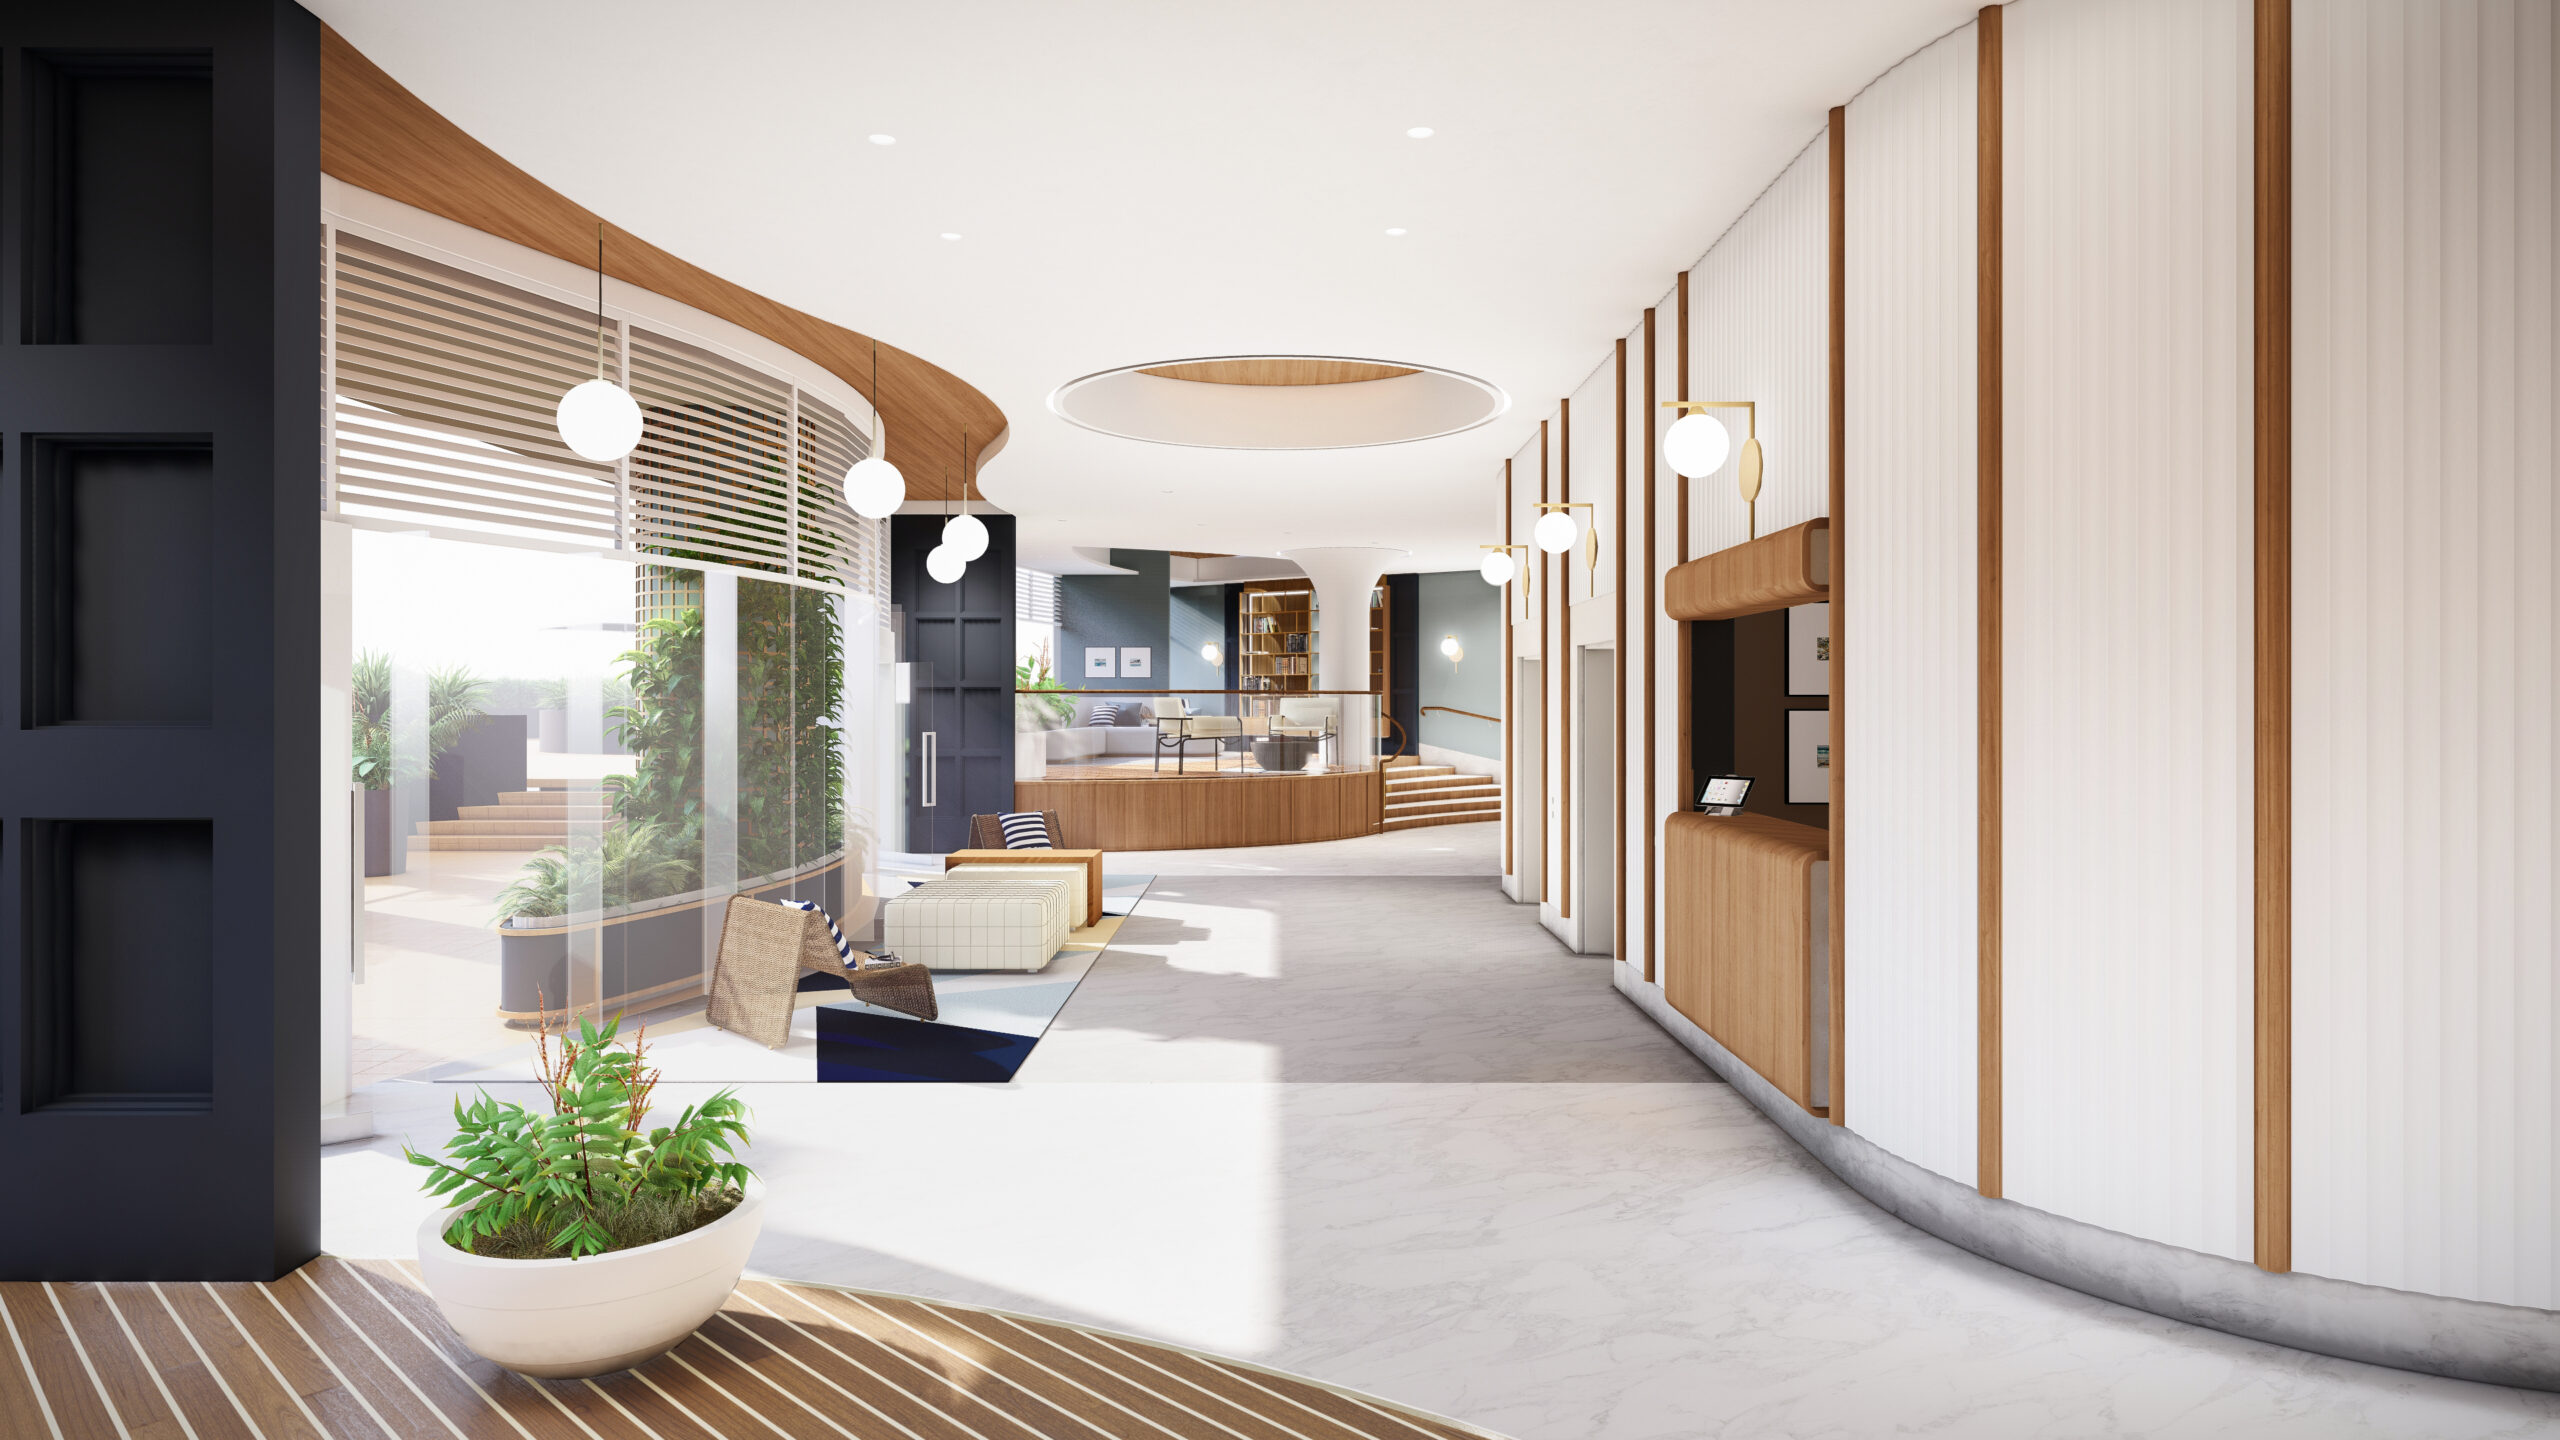 Lobby of a residential apartment building with white stone floors, navy coffered walls, and dark walnut timber details. The space features modern furniture, ample natural light, and an inviting ambiance.